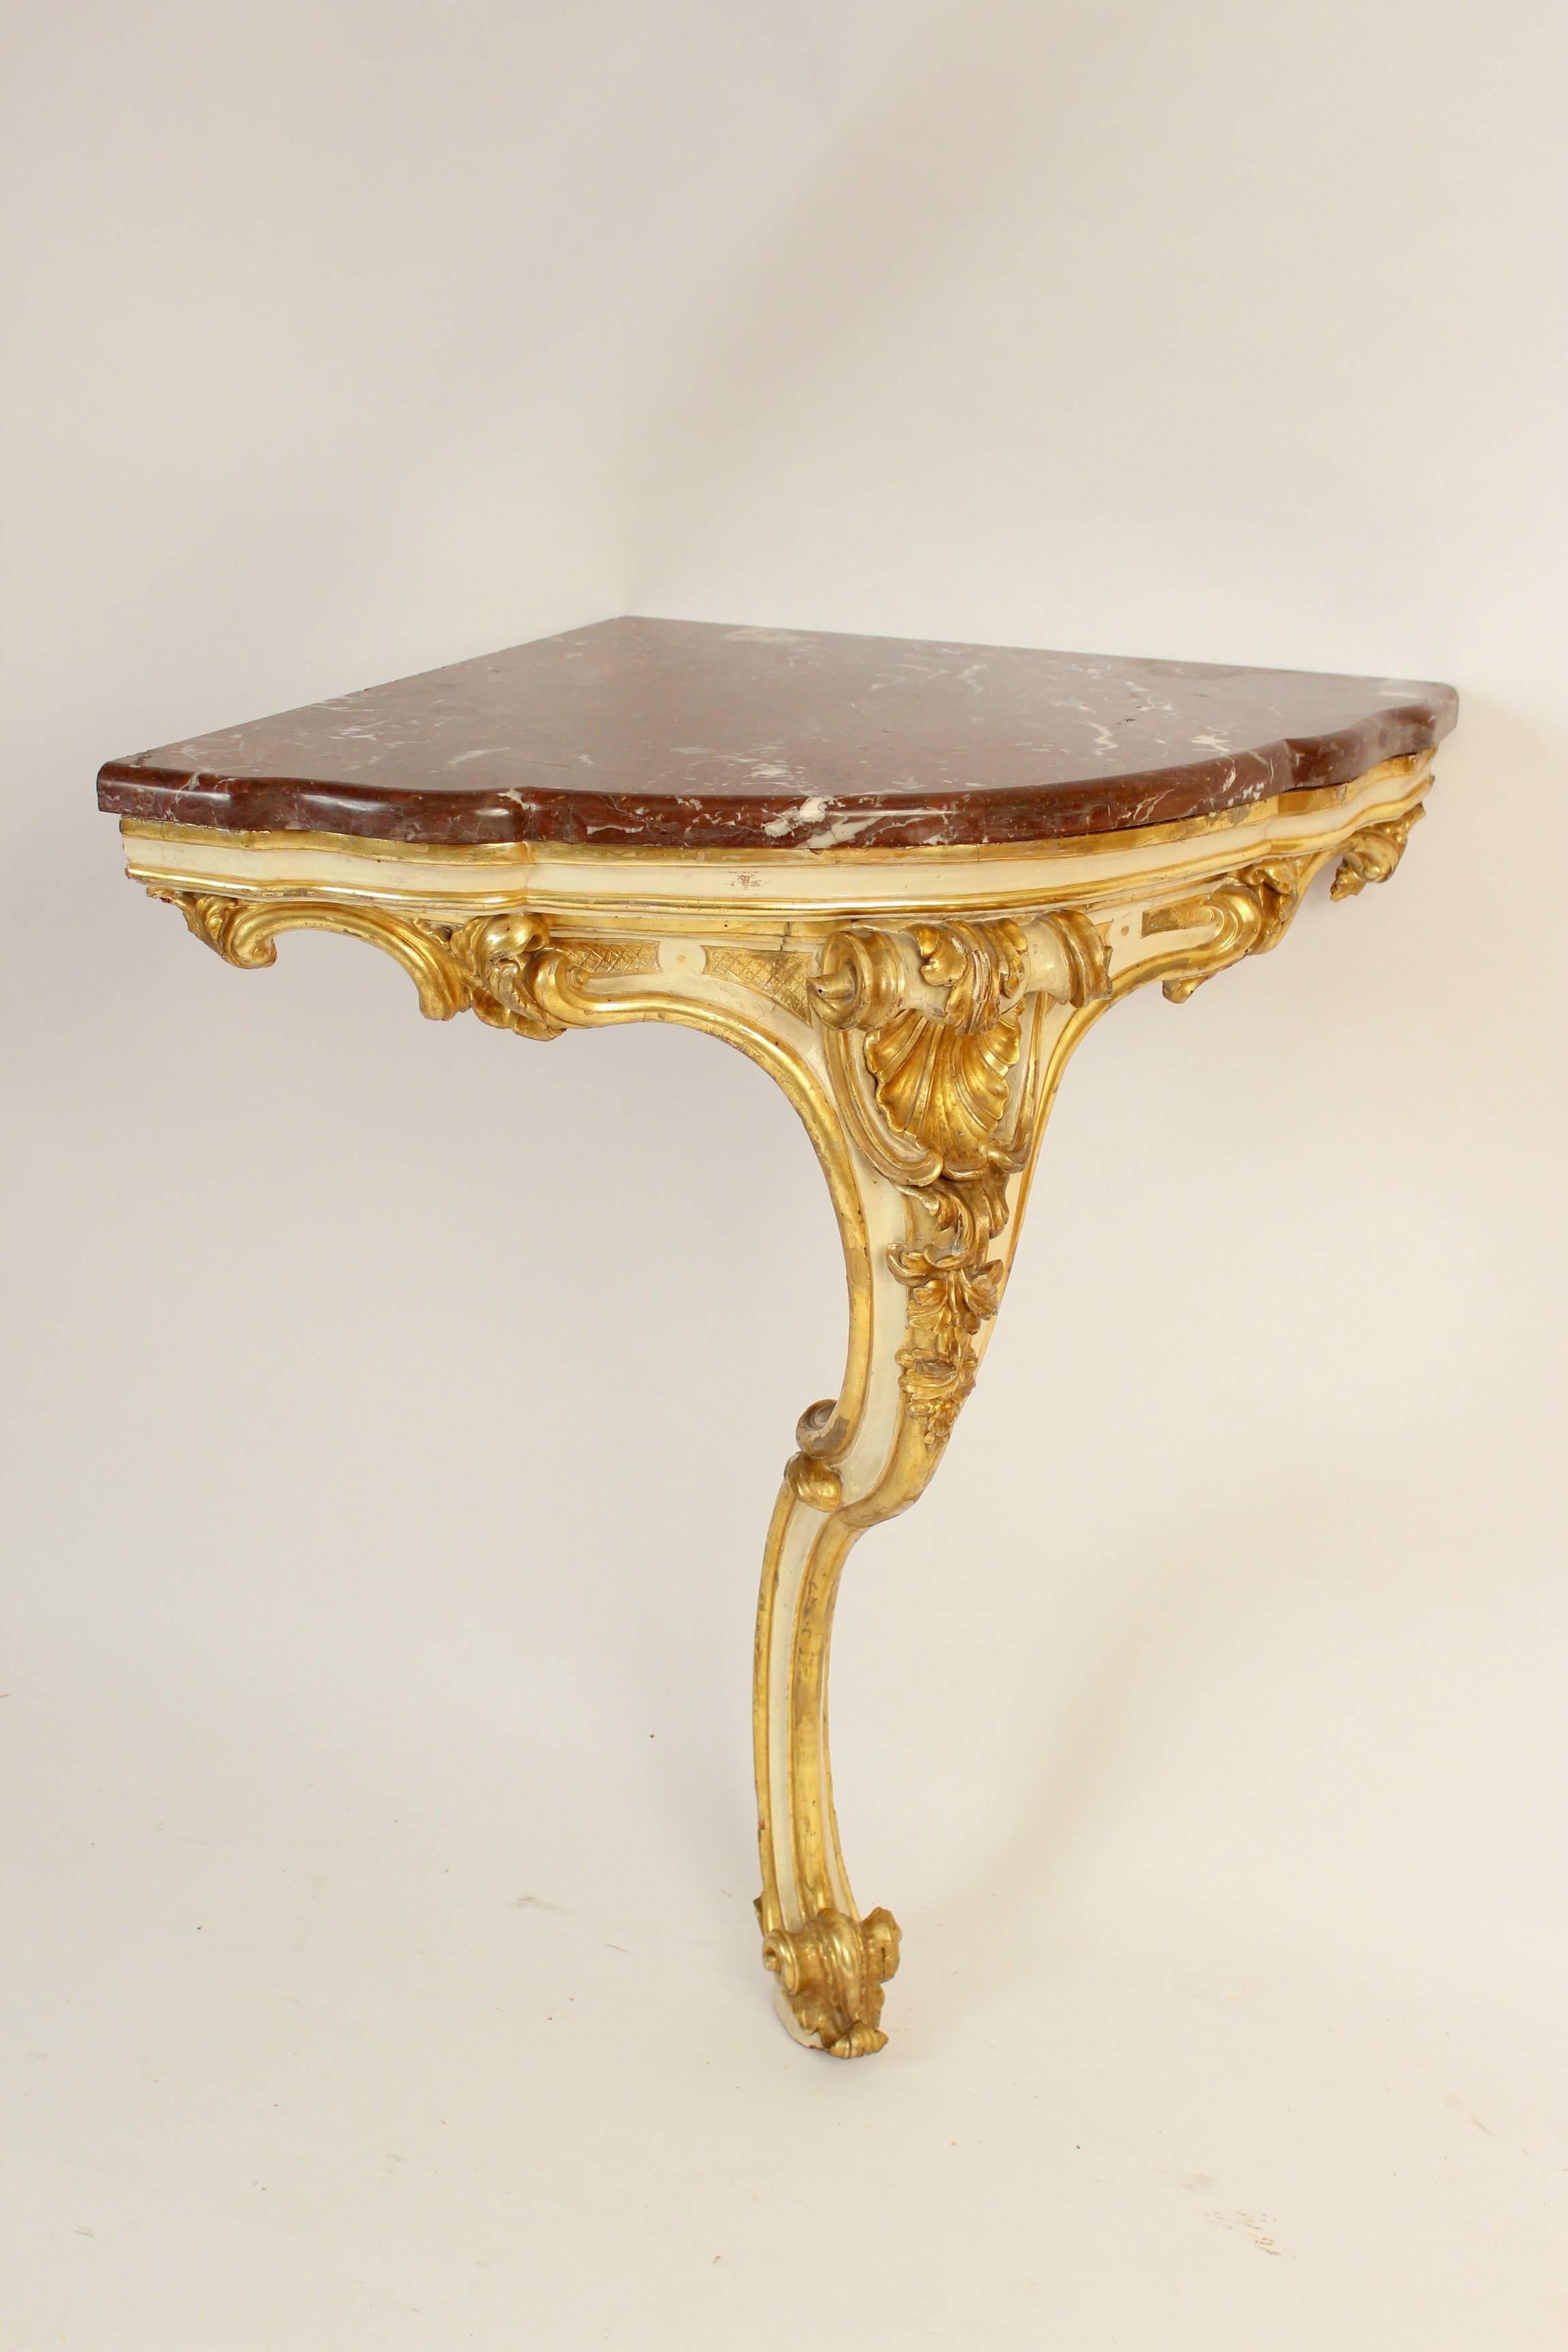 Antique Louis XV style painted and gilt decorated (gold leaf) marble-top console table, early 19th century. This console table has excellent quality carving and gilding. Approximately 10% of the gilding has been restored.